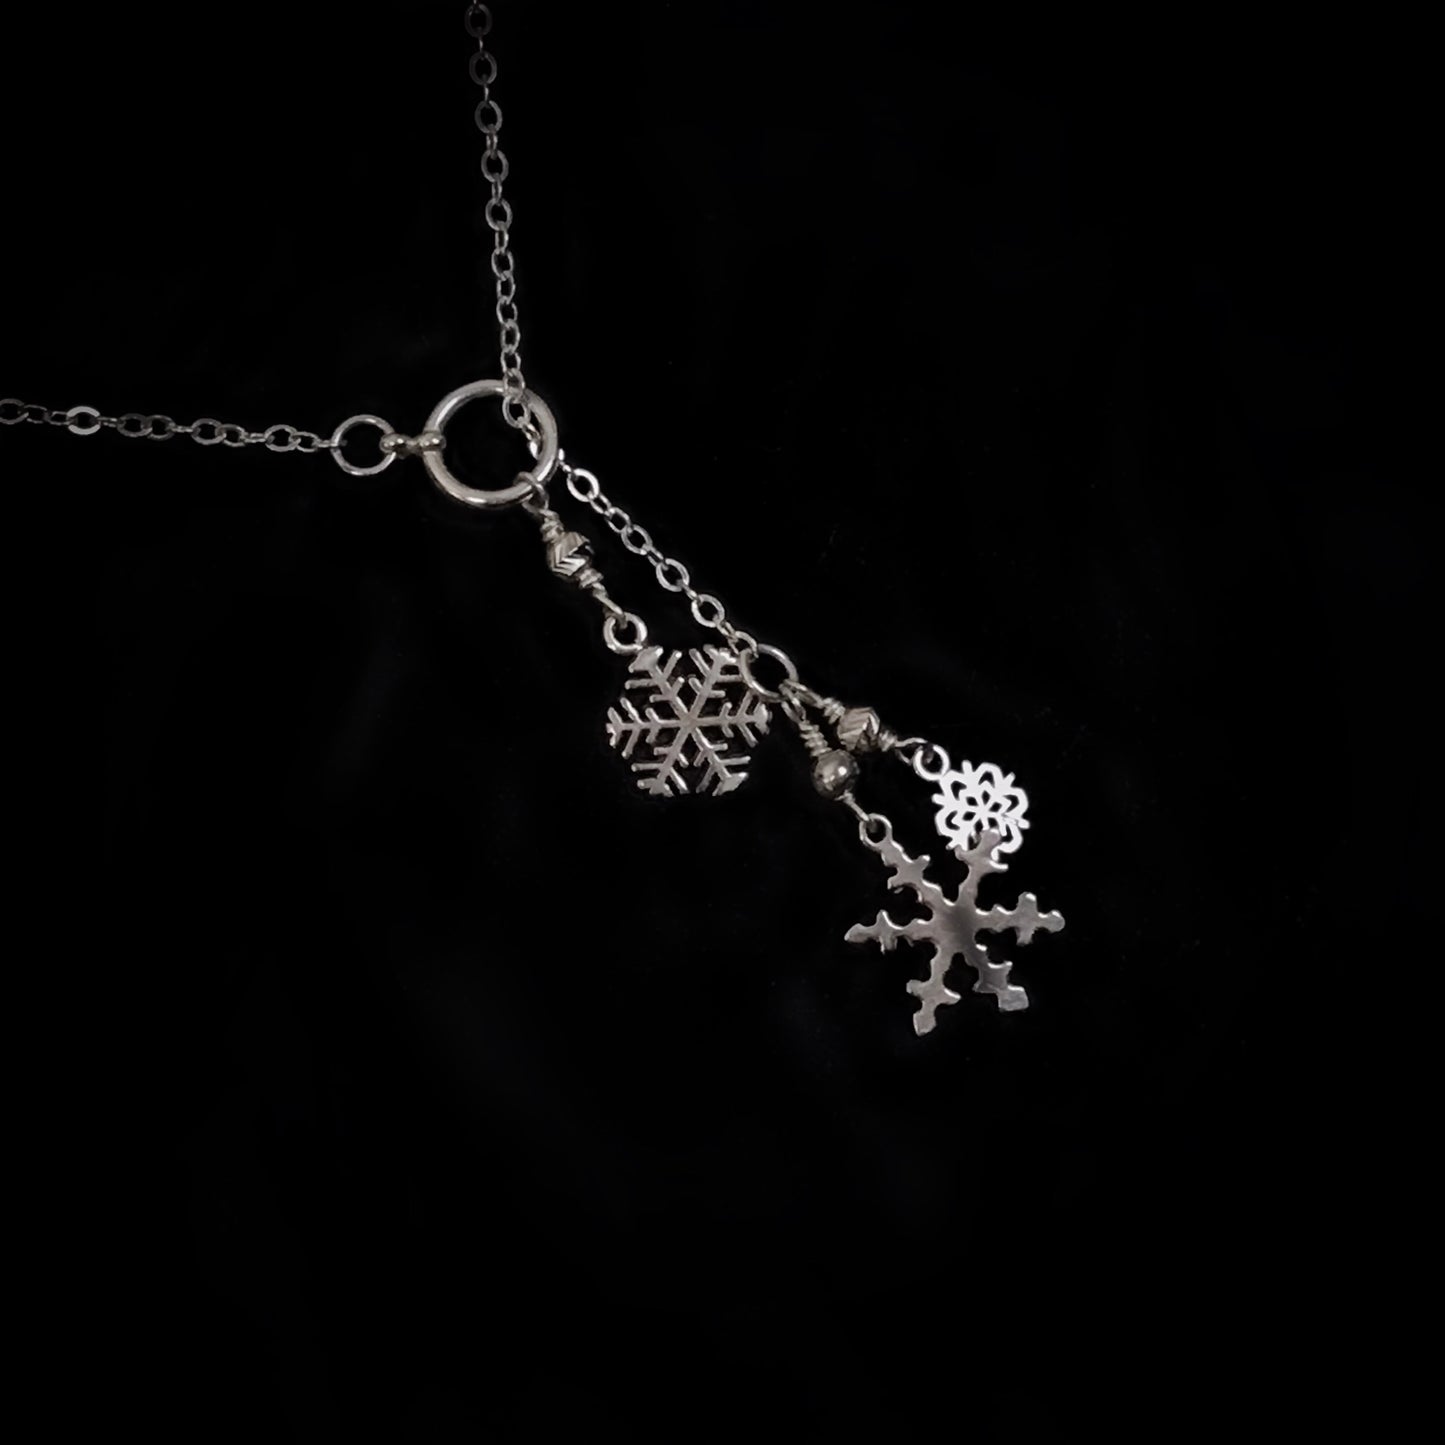 Snowflake Sterling Silver Lariat Necklace